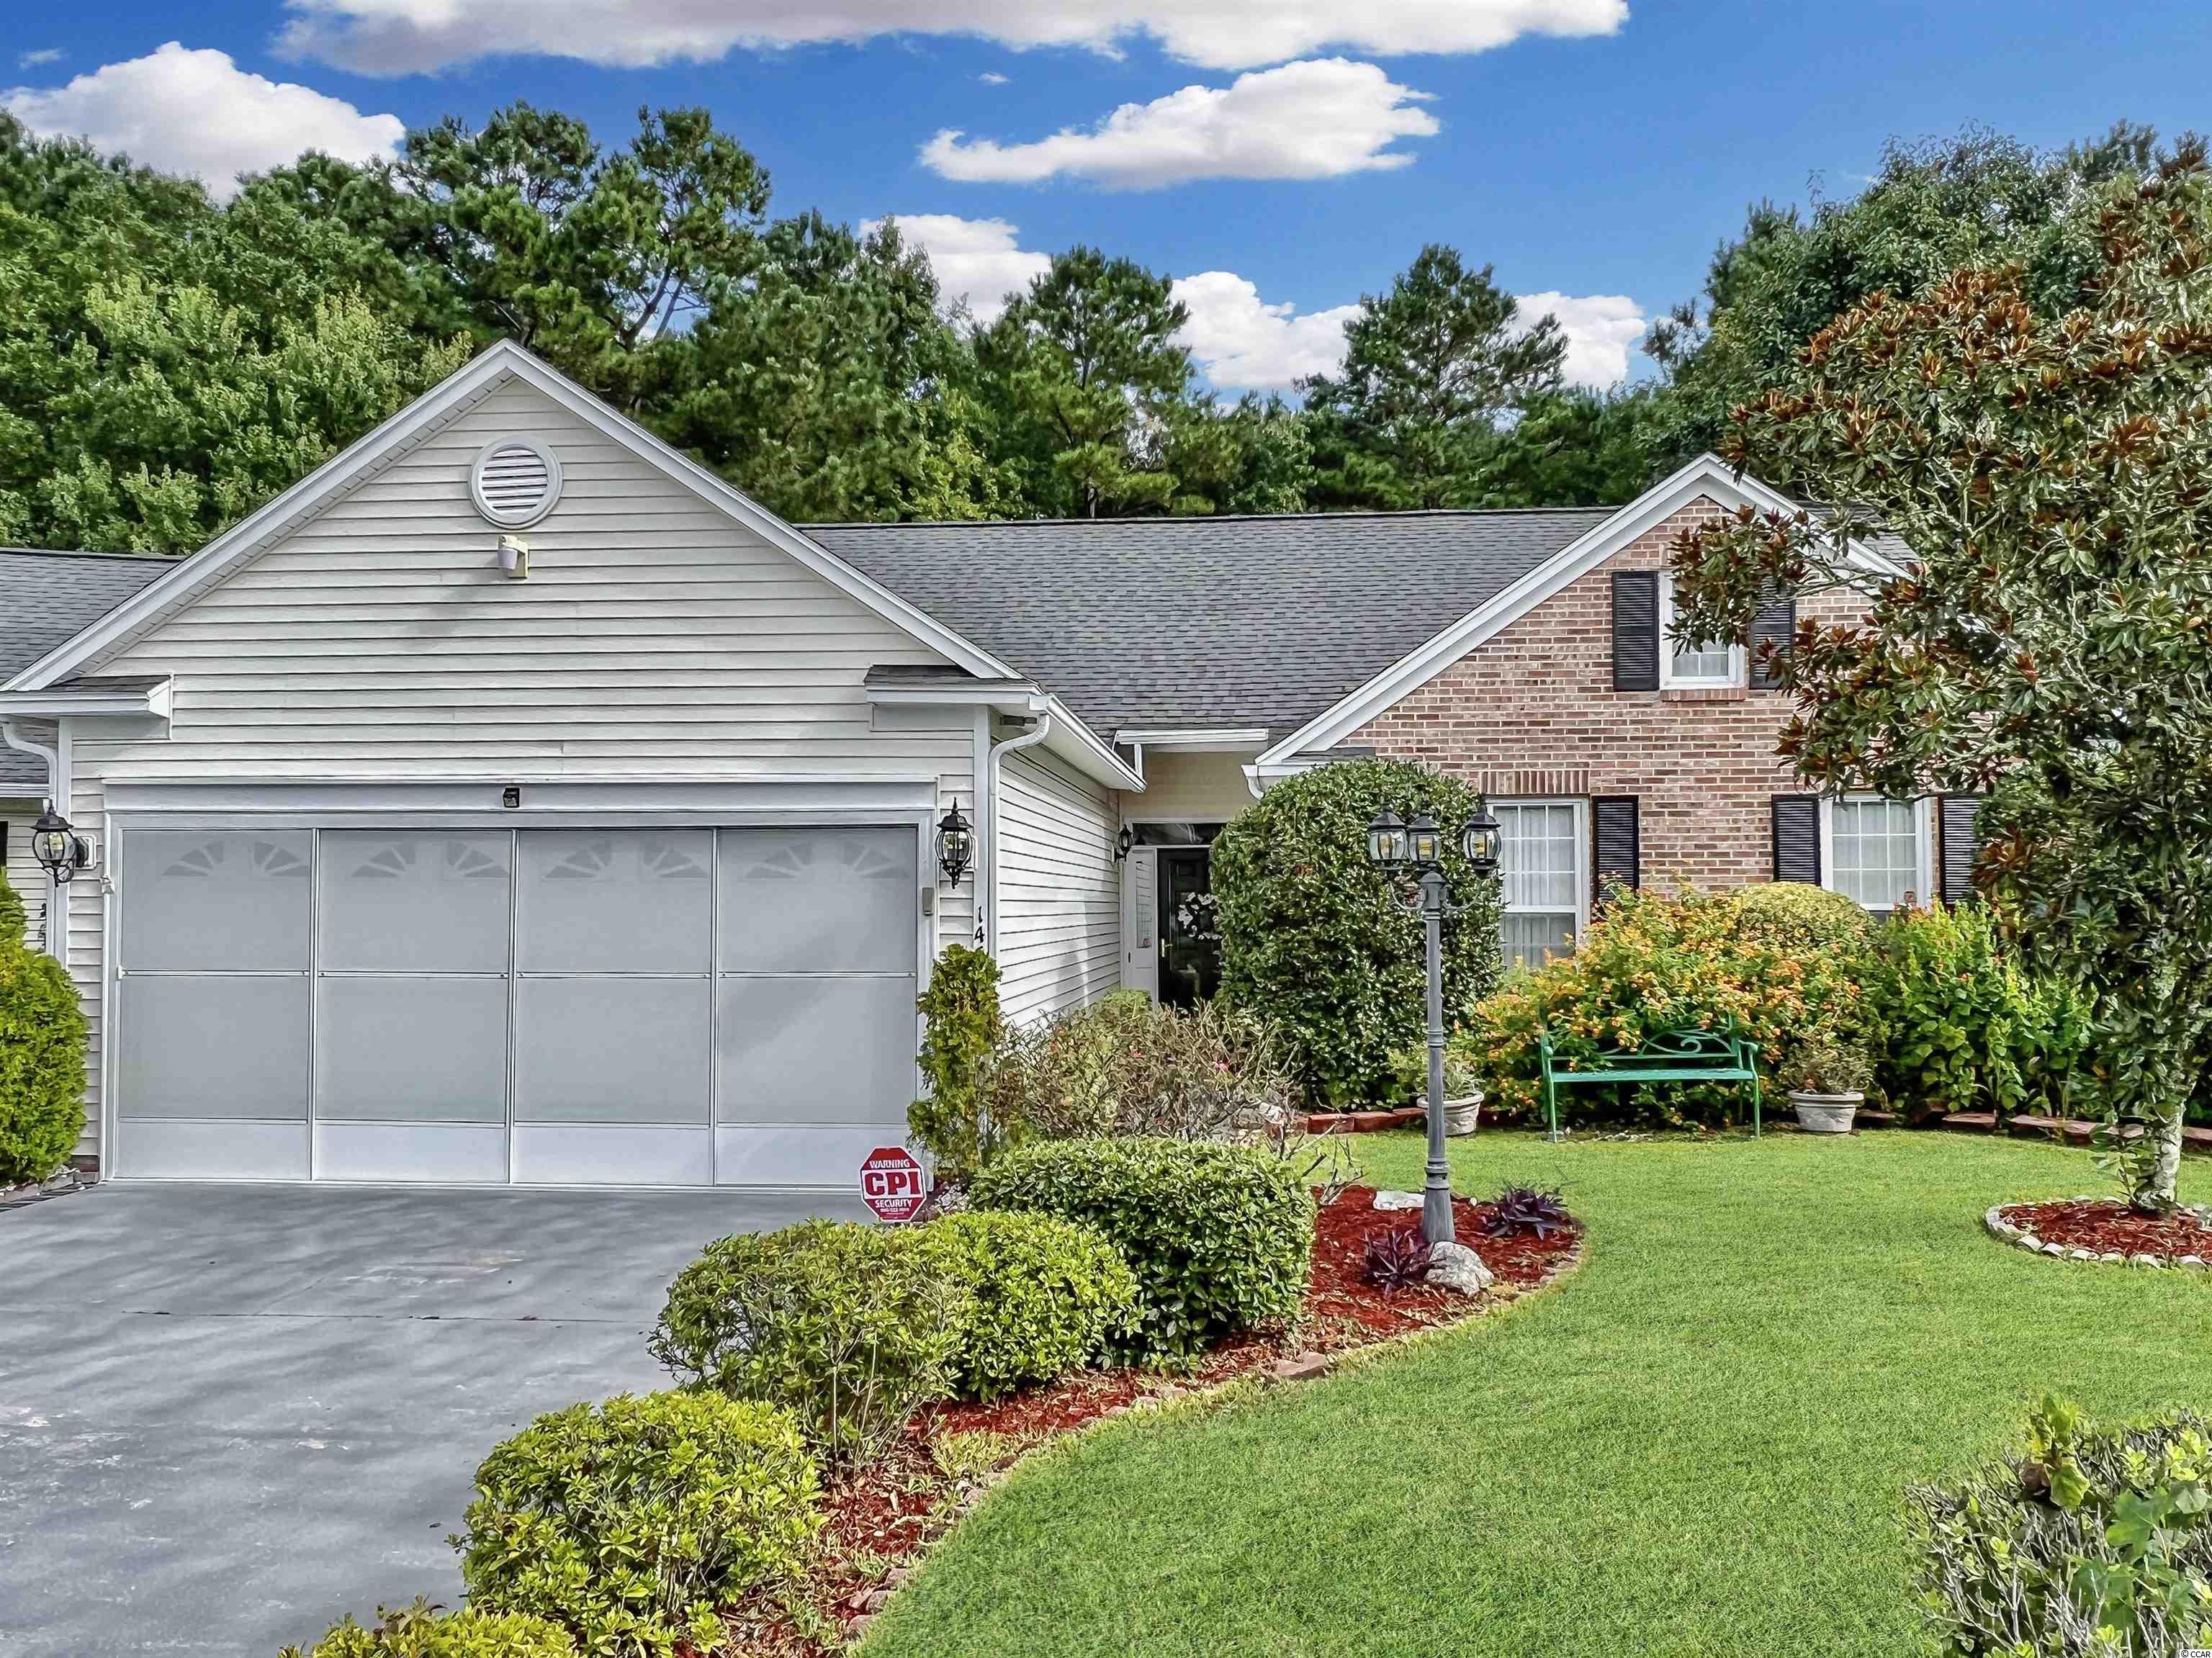 1466 Winged Foot Ct. Murrells Inlet, SC 29576